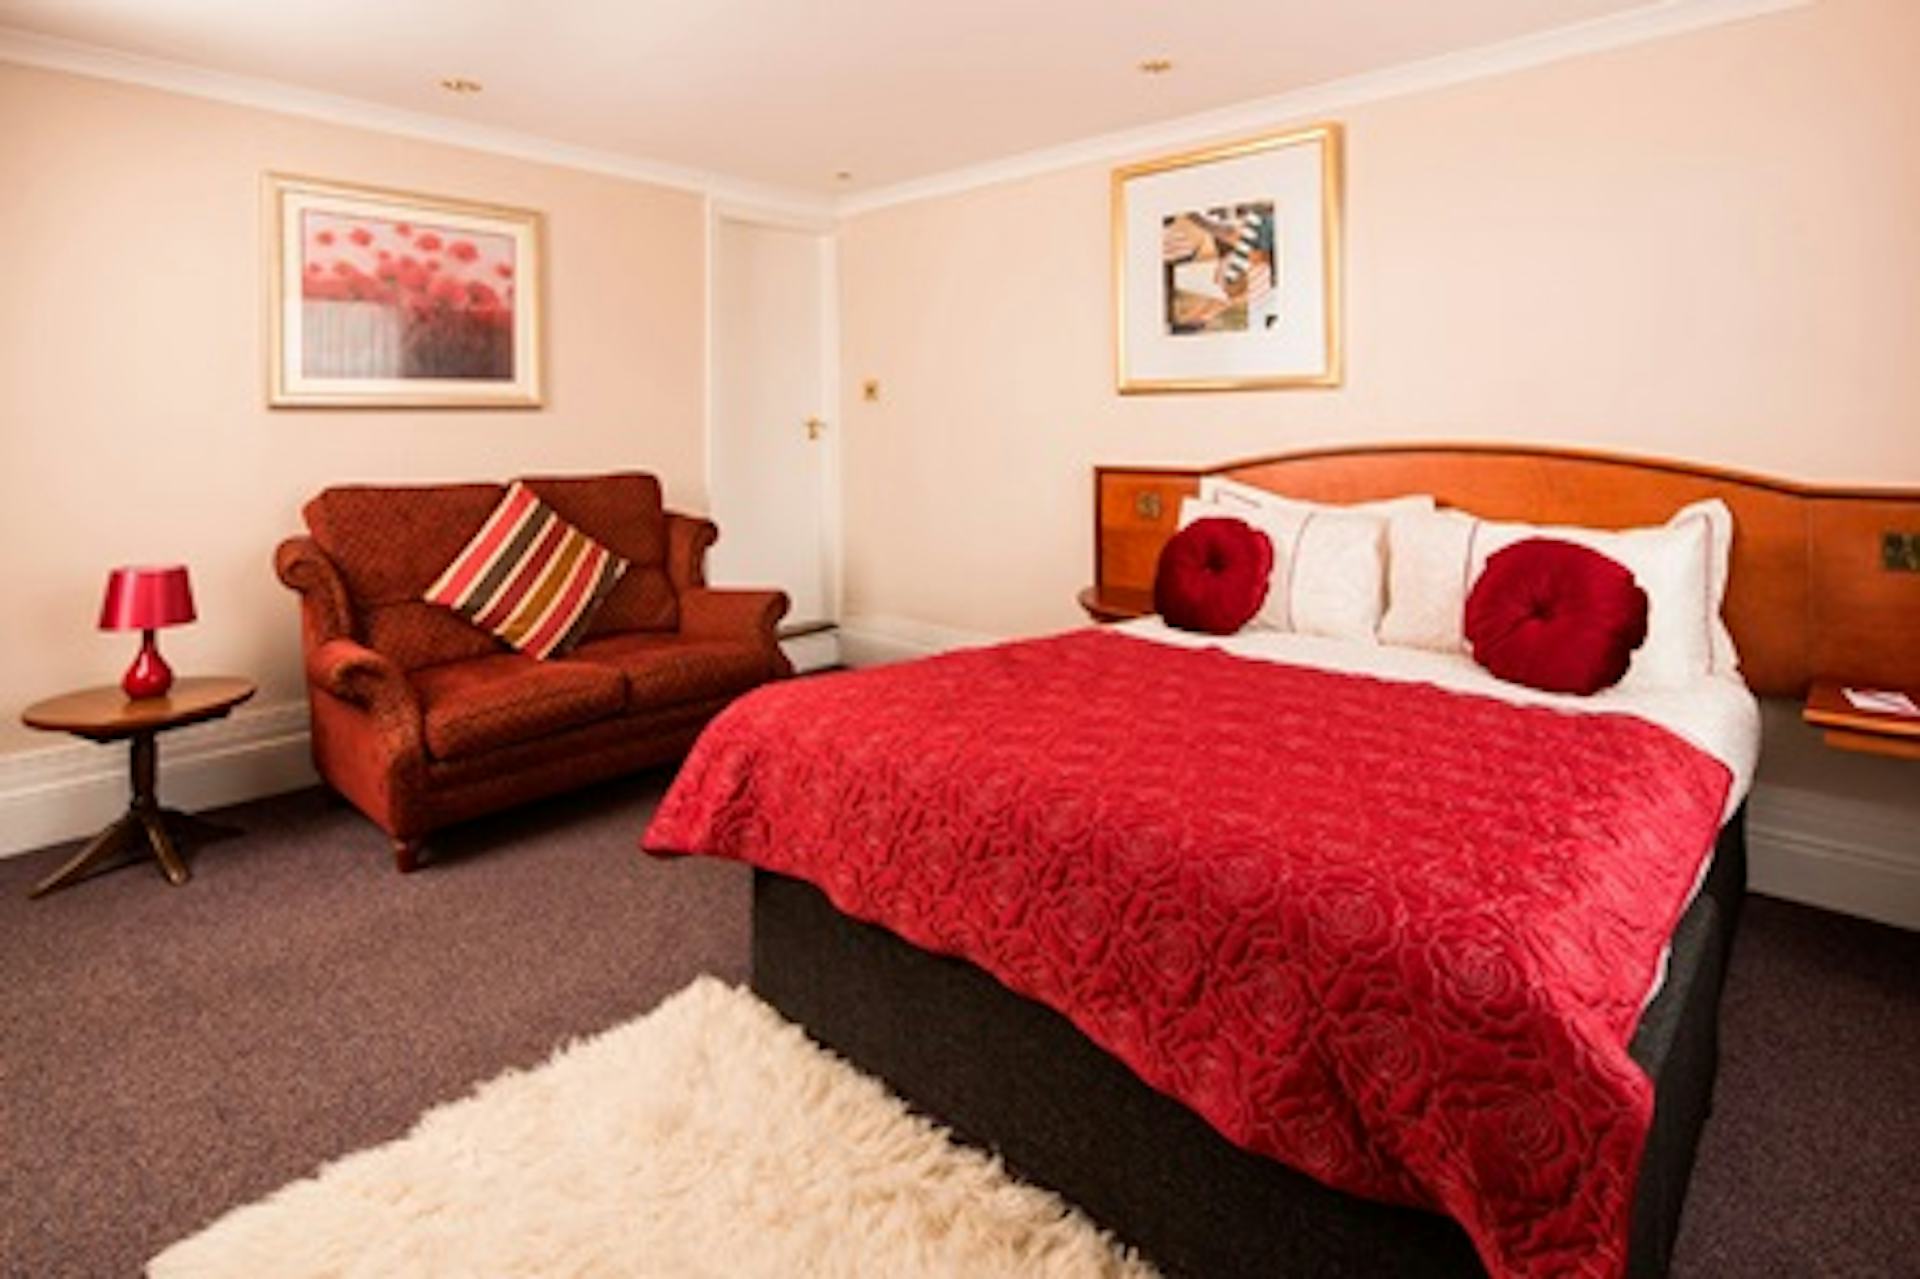 One Night Break for Two at the Mercure Newton Park Hotel, Burton On Trent